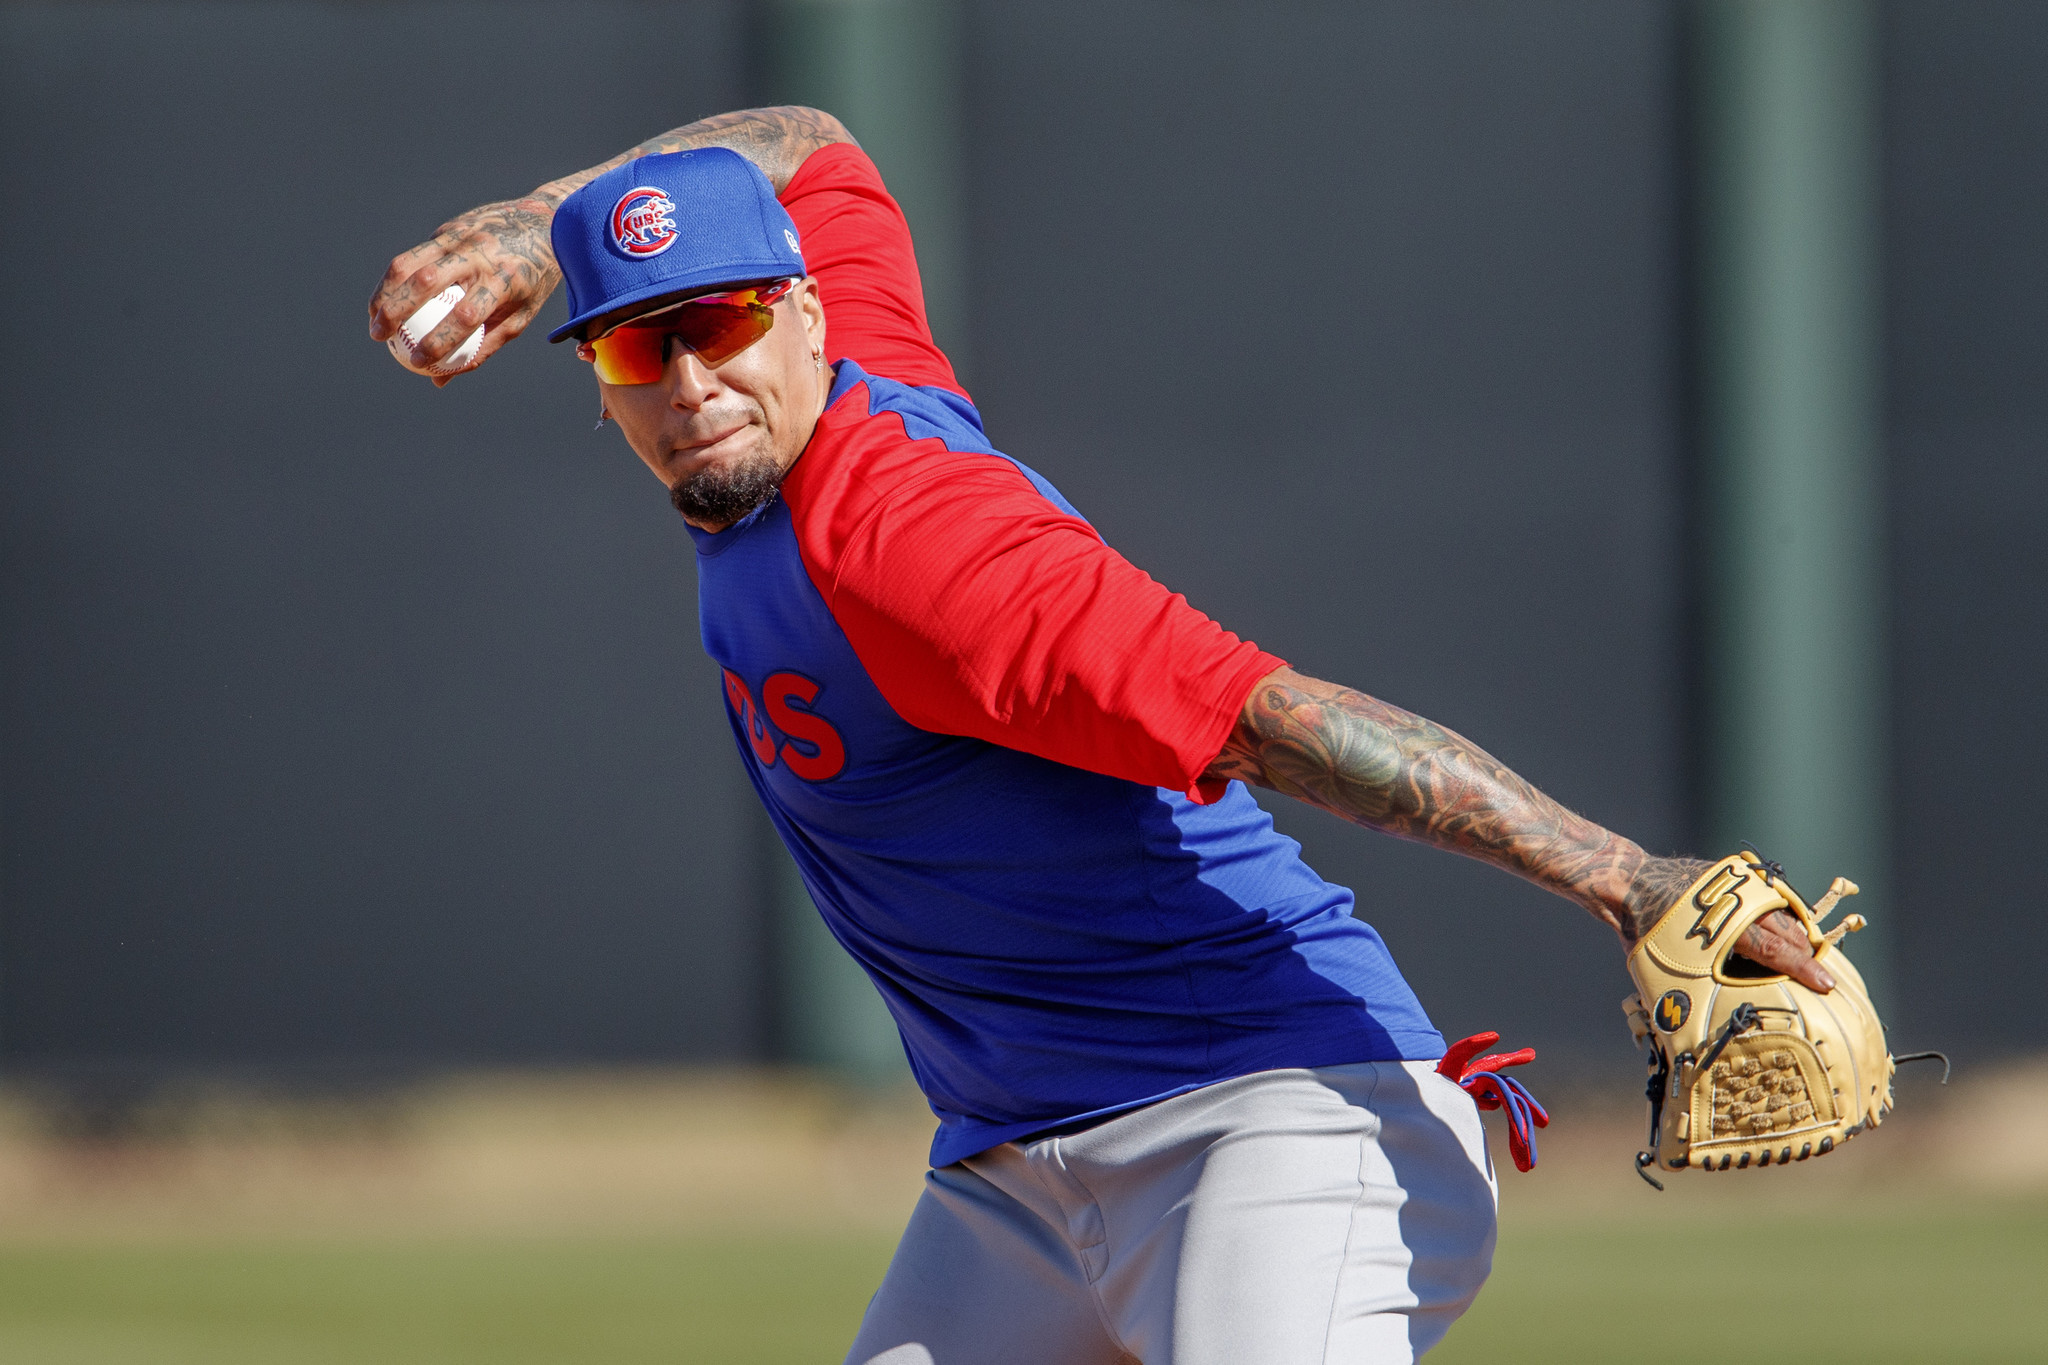 Cubs Opening Day roster projection with two weeks left in spring